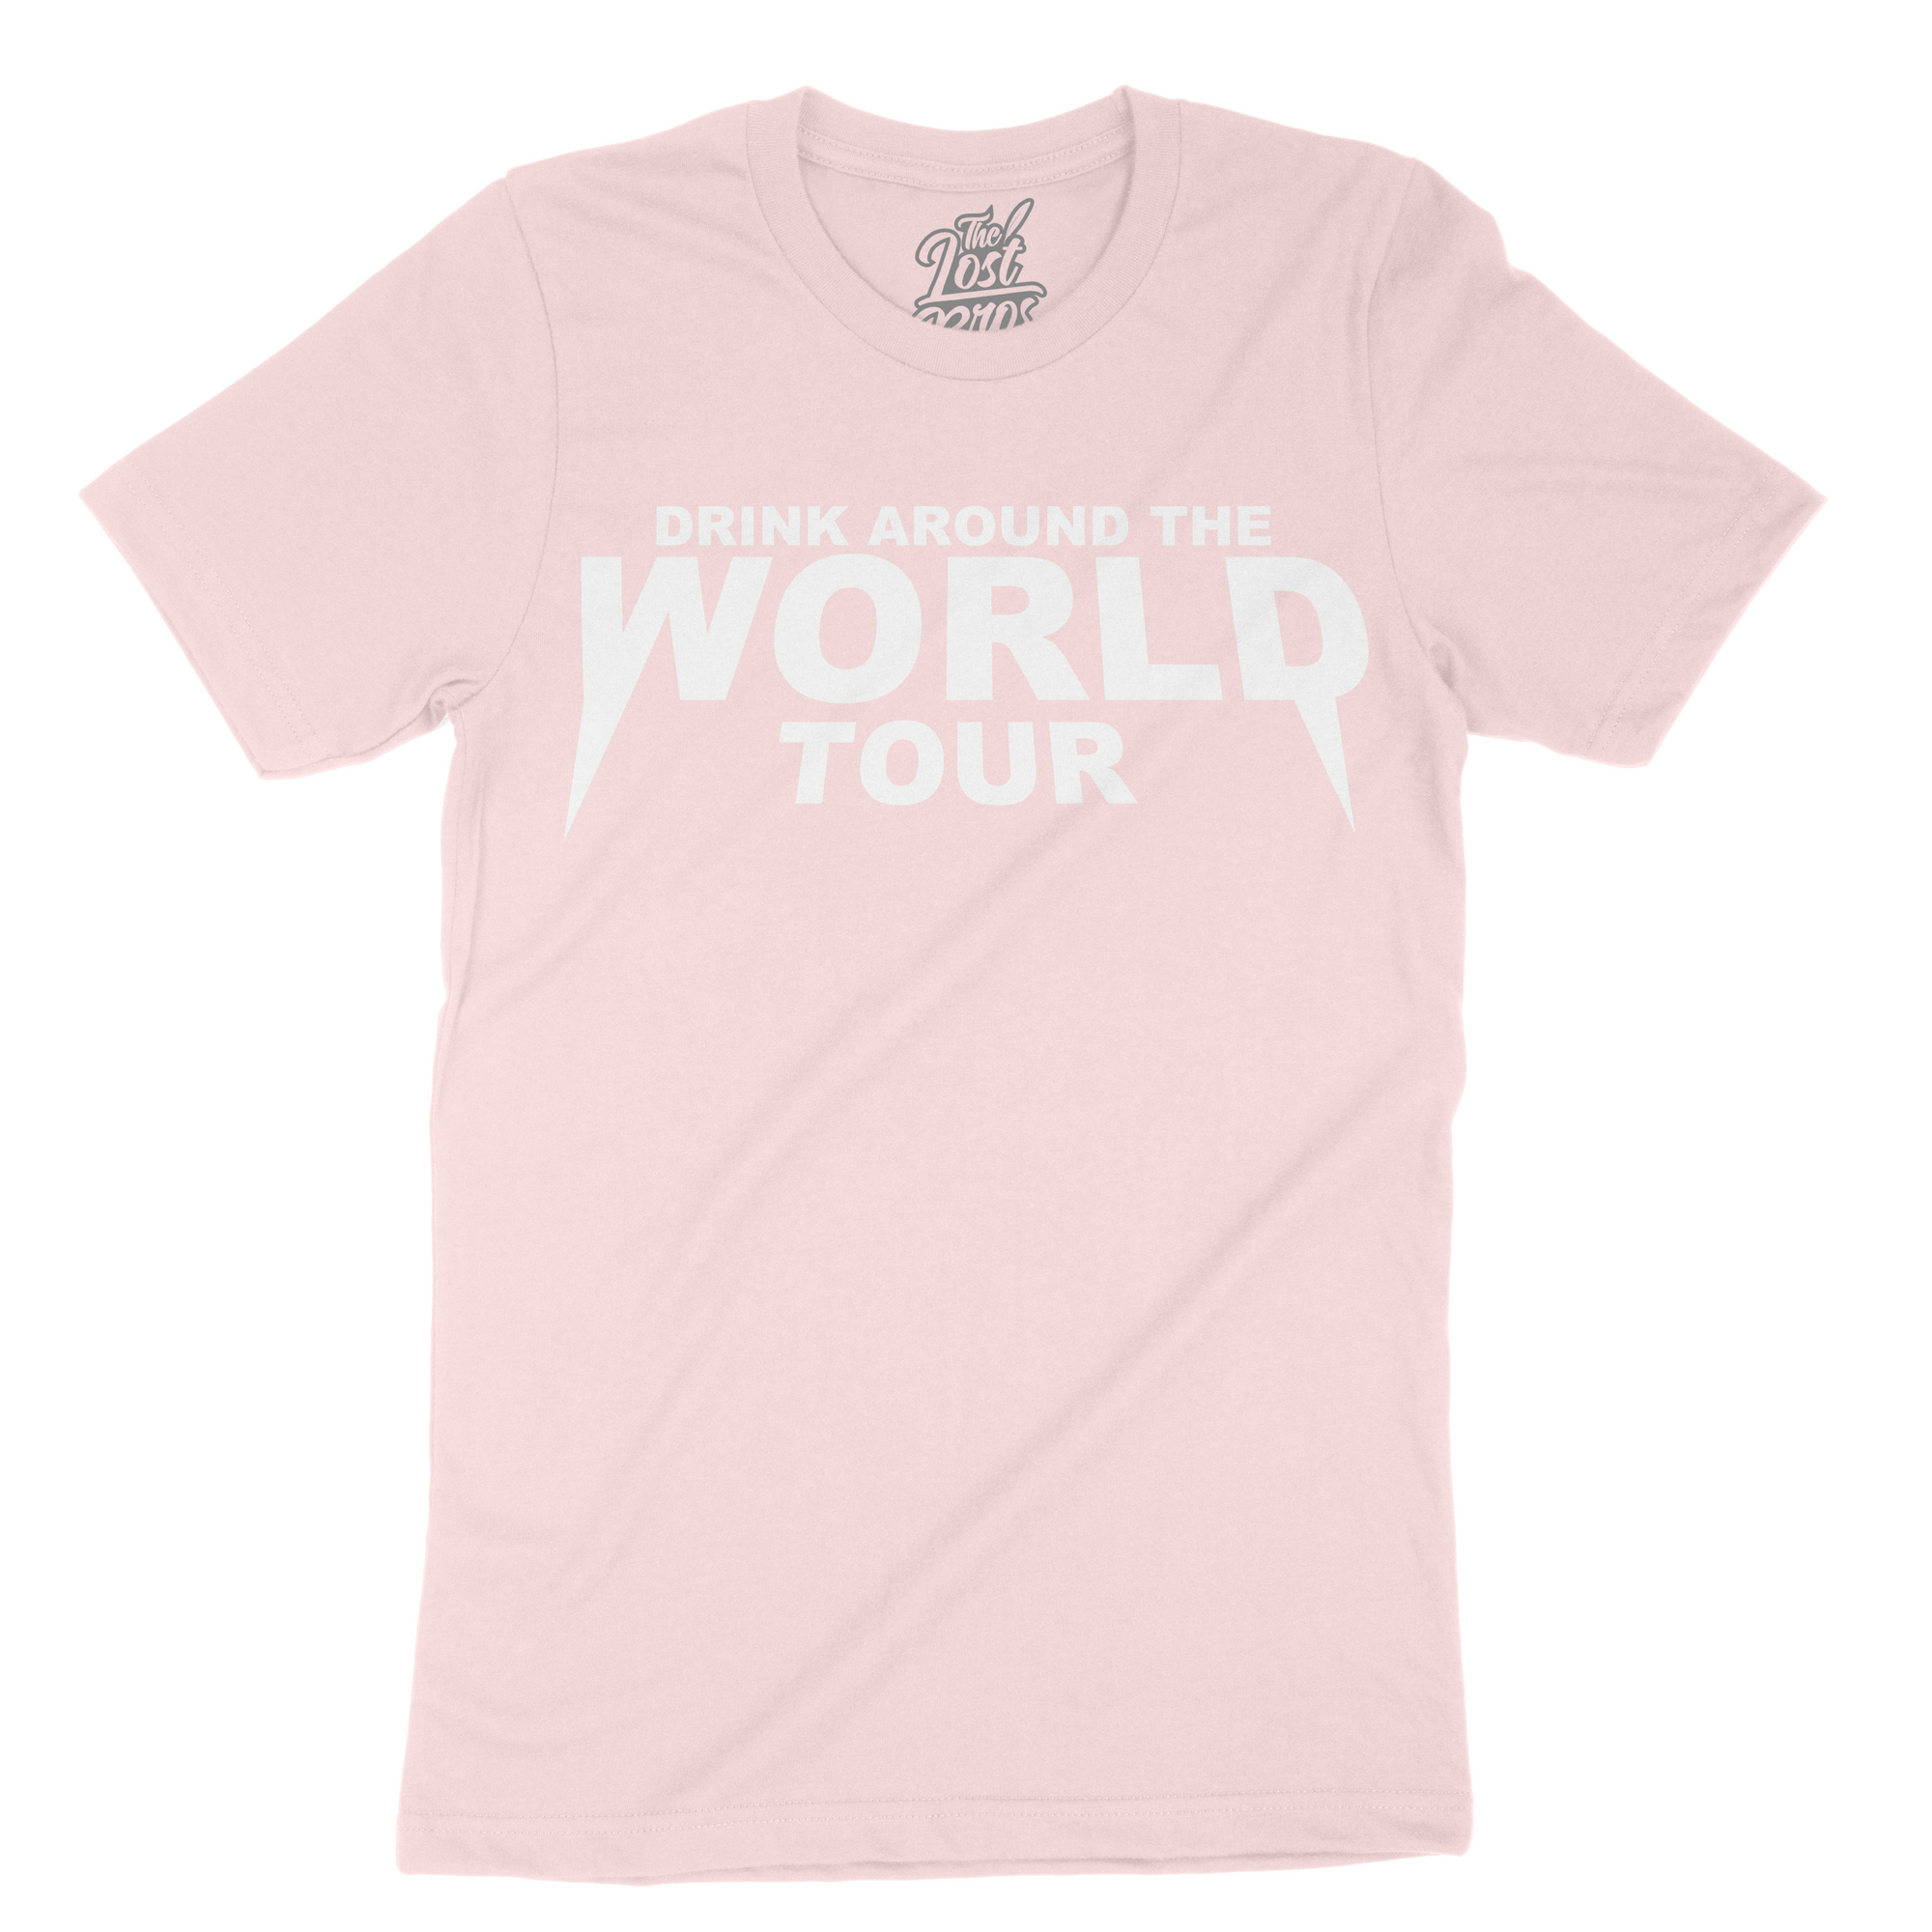 Drink Around the World Tour Tee - Pink The Lost Bros